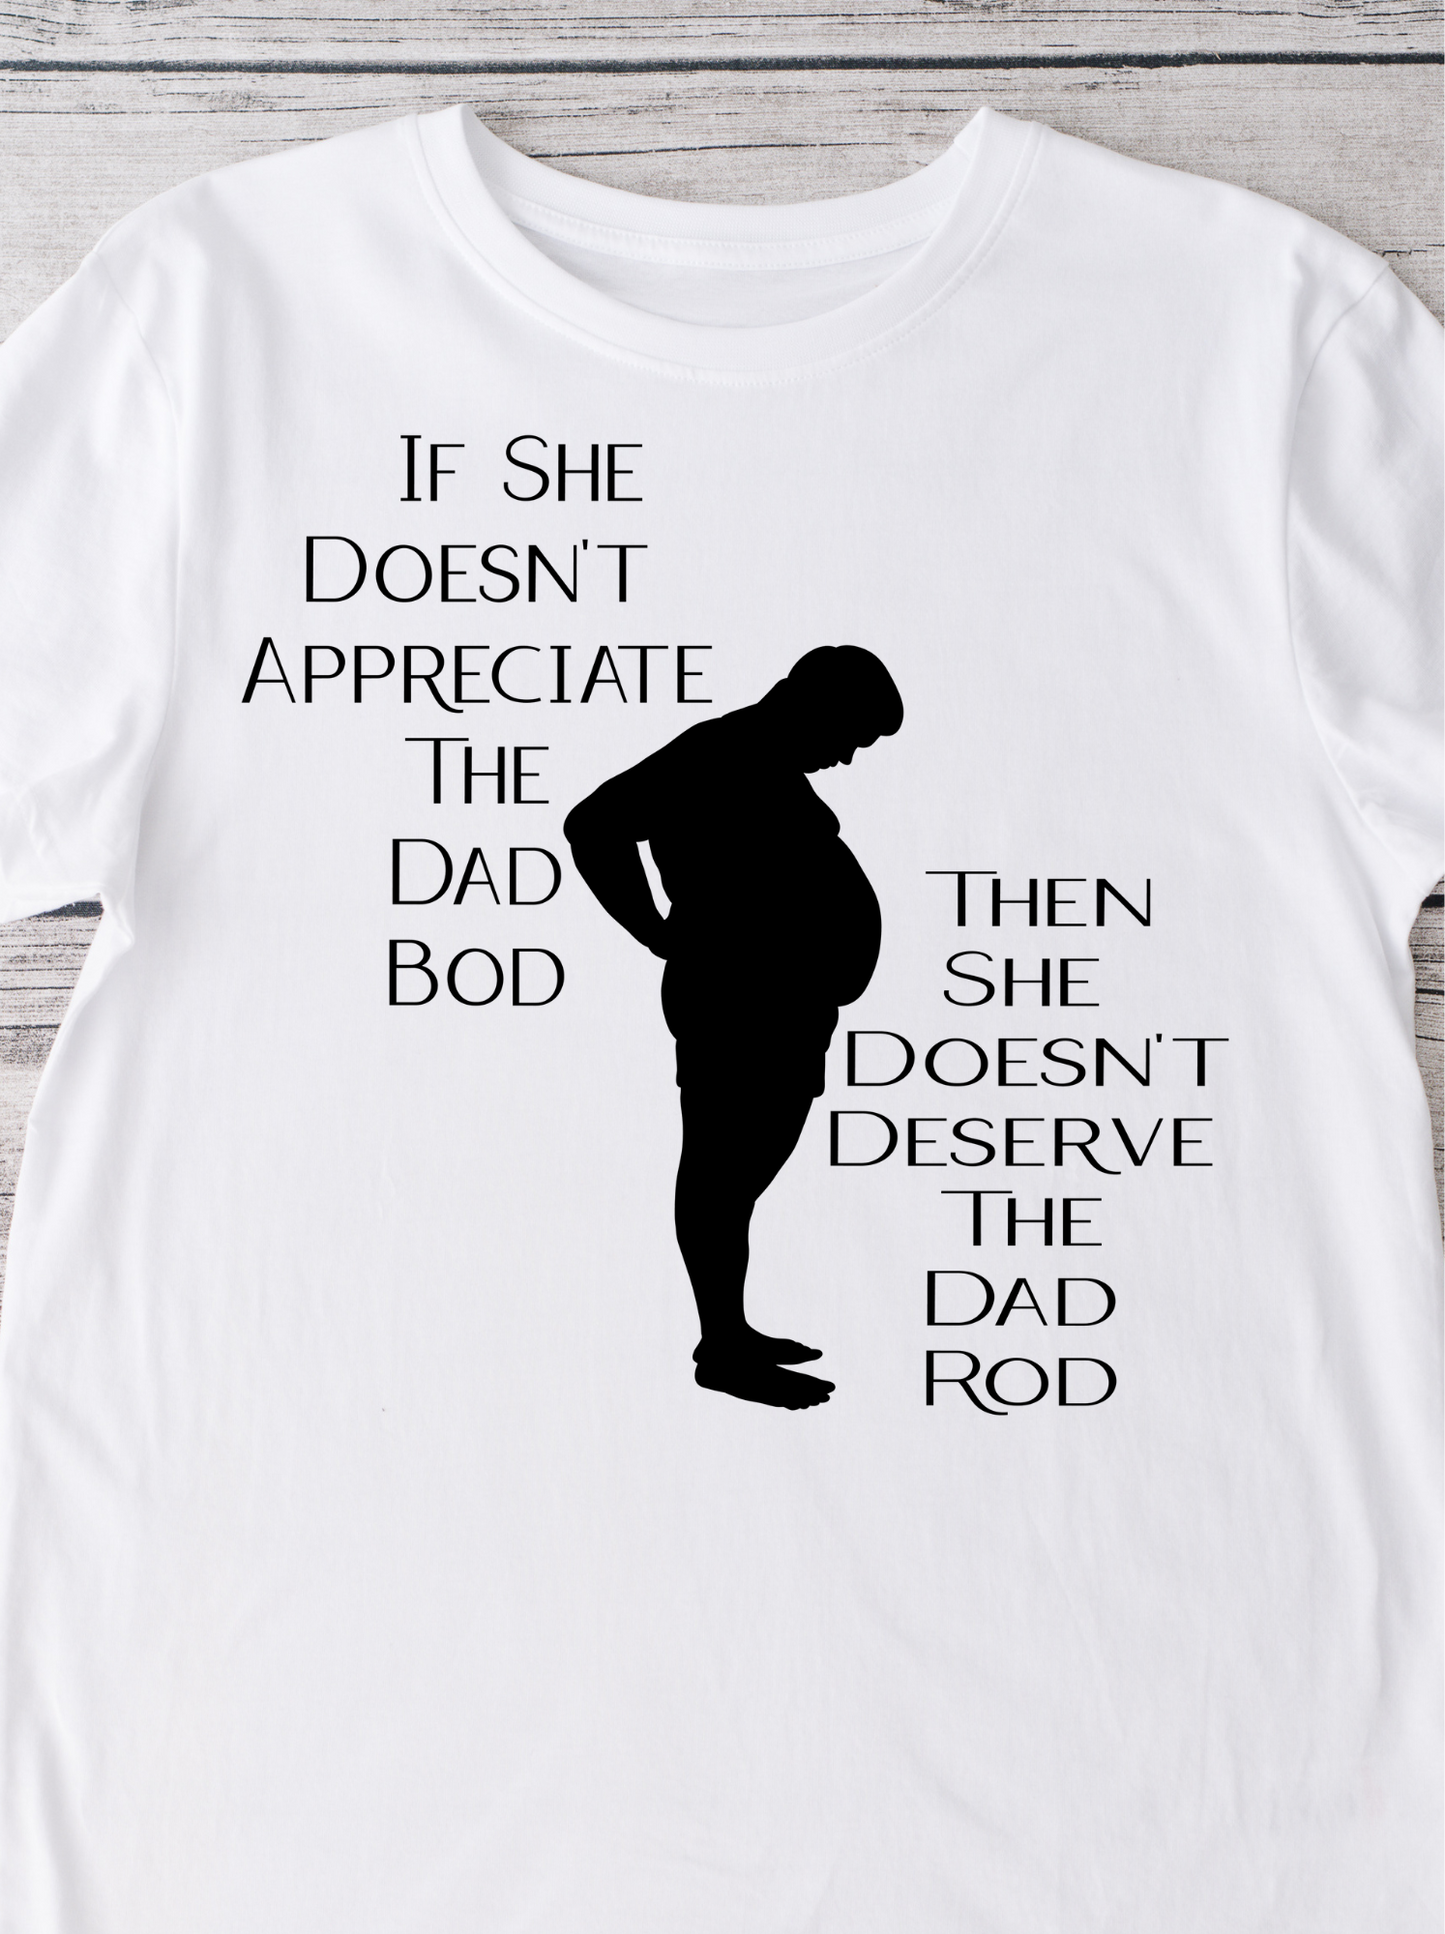 Mens funny sublimation shirts (click for more)